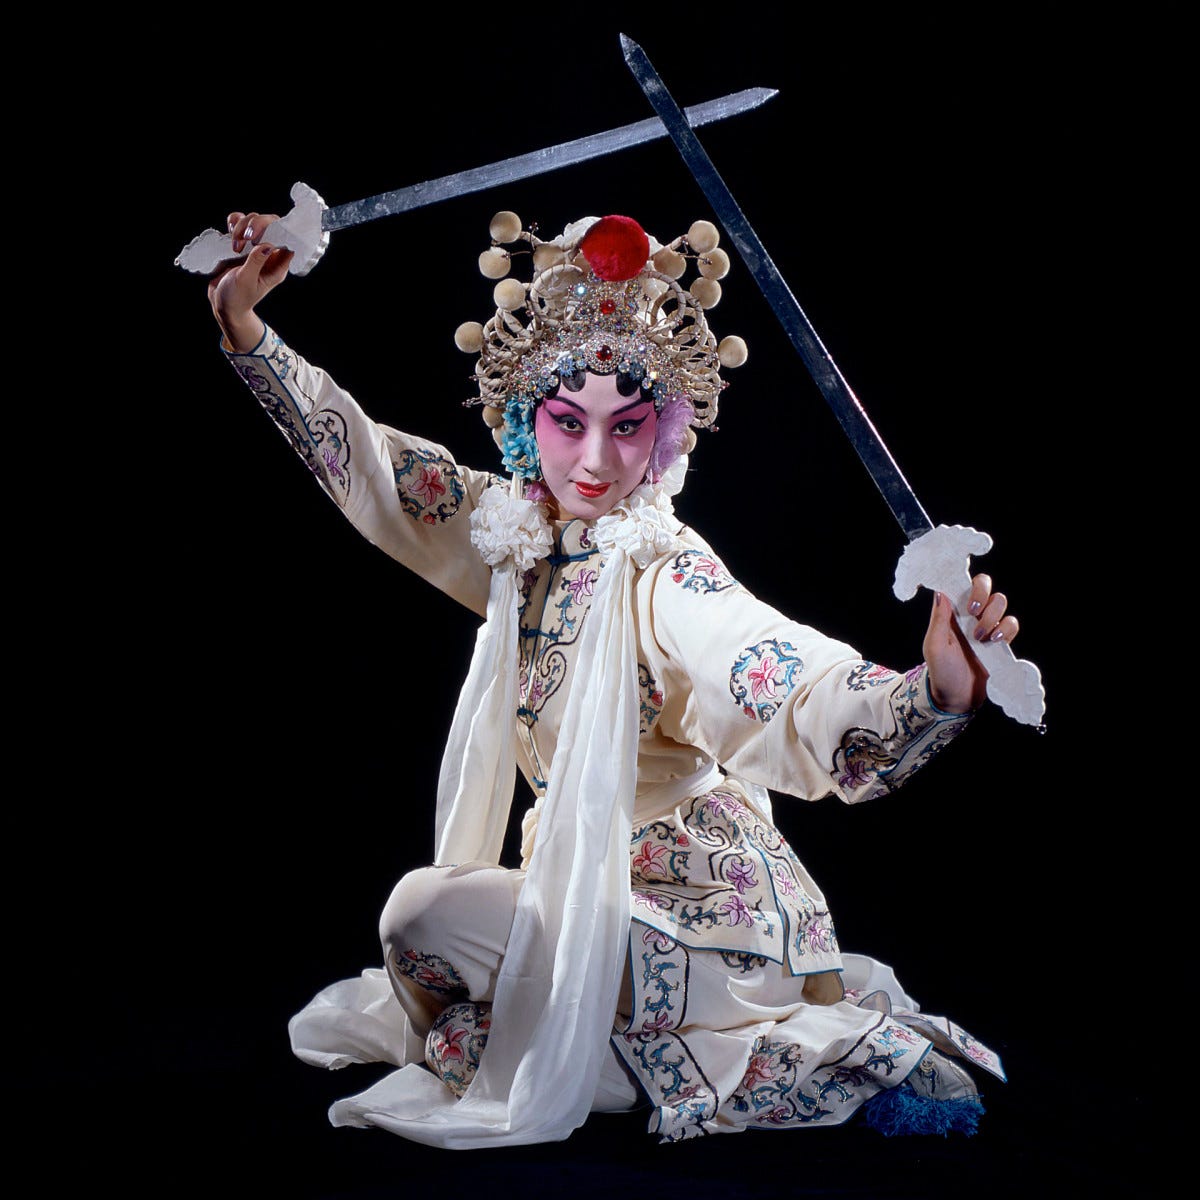 An actress plays the role of the White Snake in Baisha Zhuan (The Legend of White Snake) in a Chinese opera, 2000.